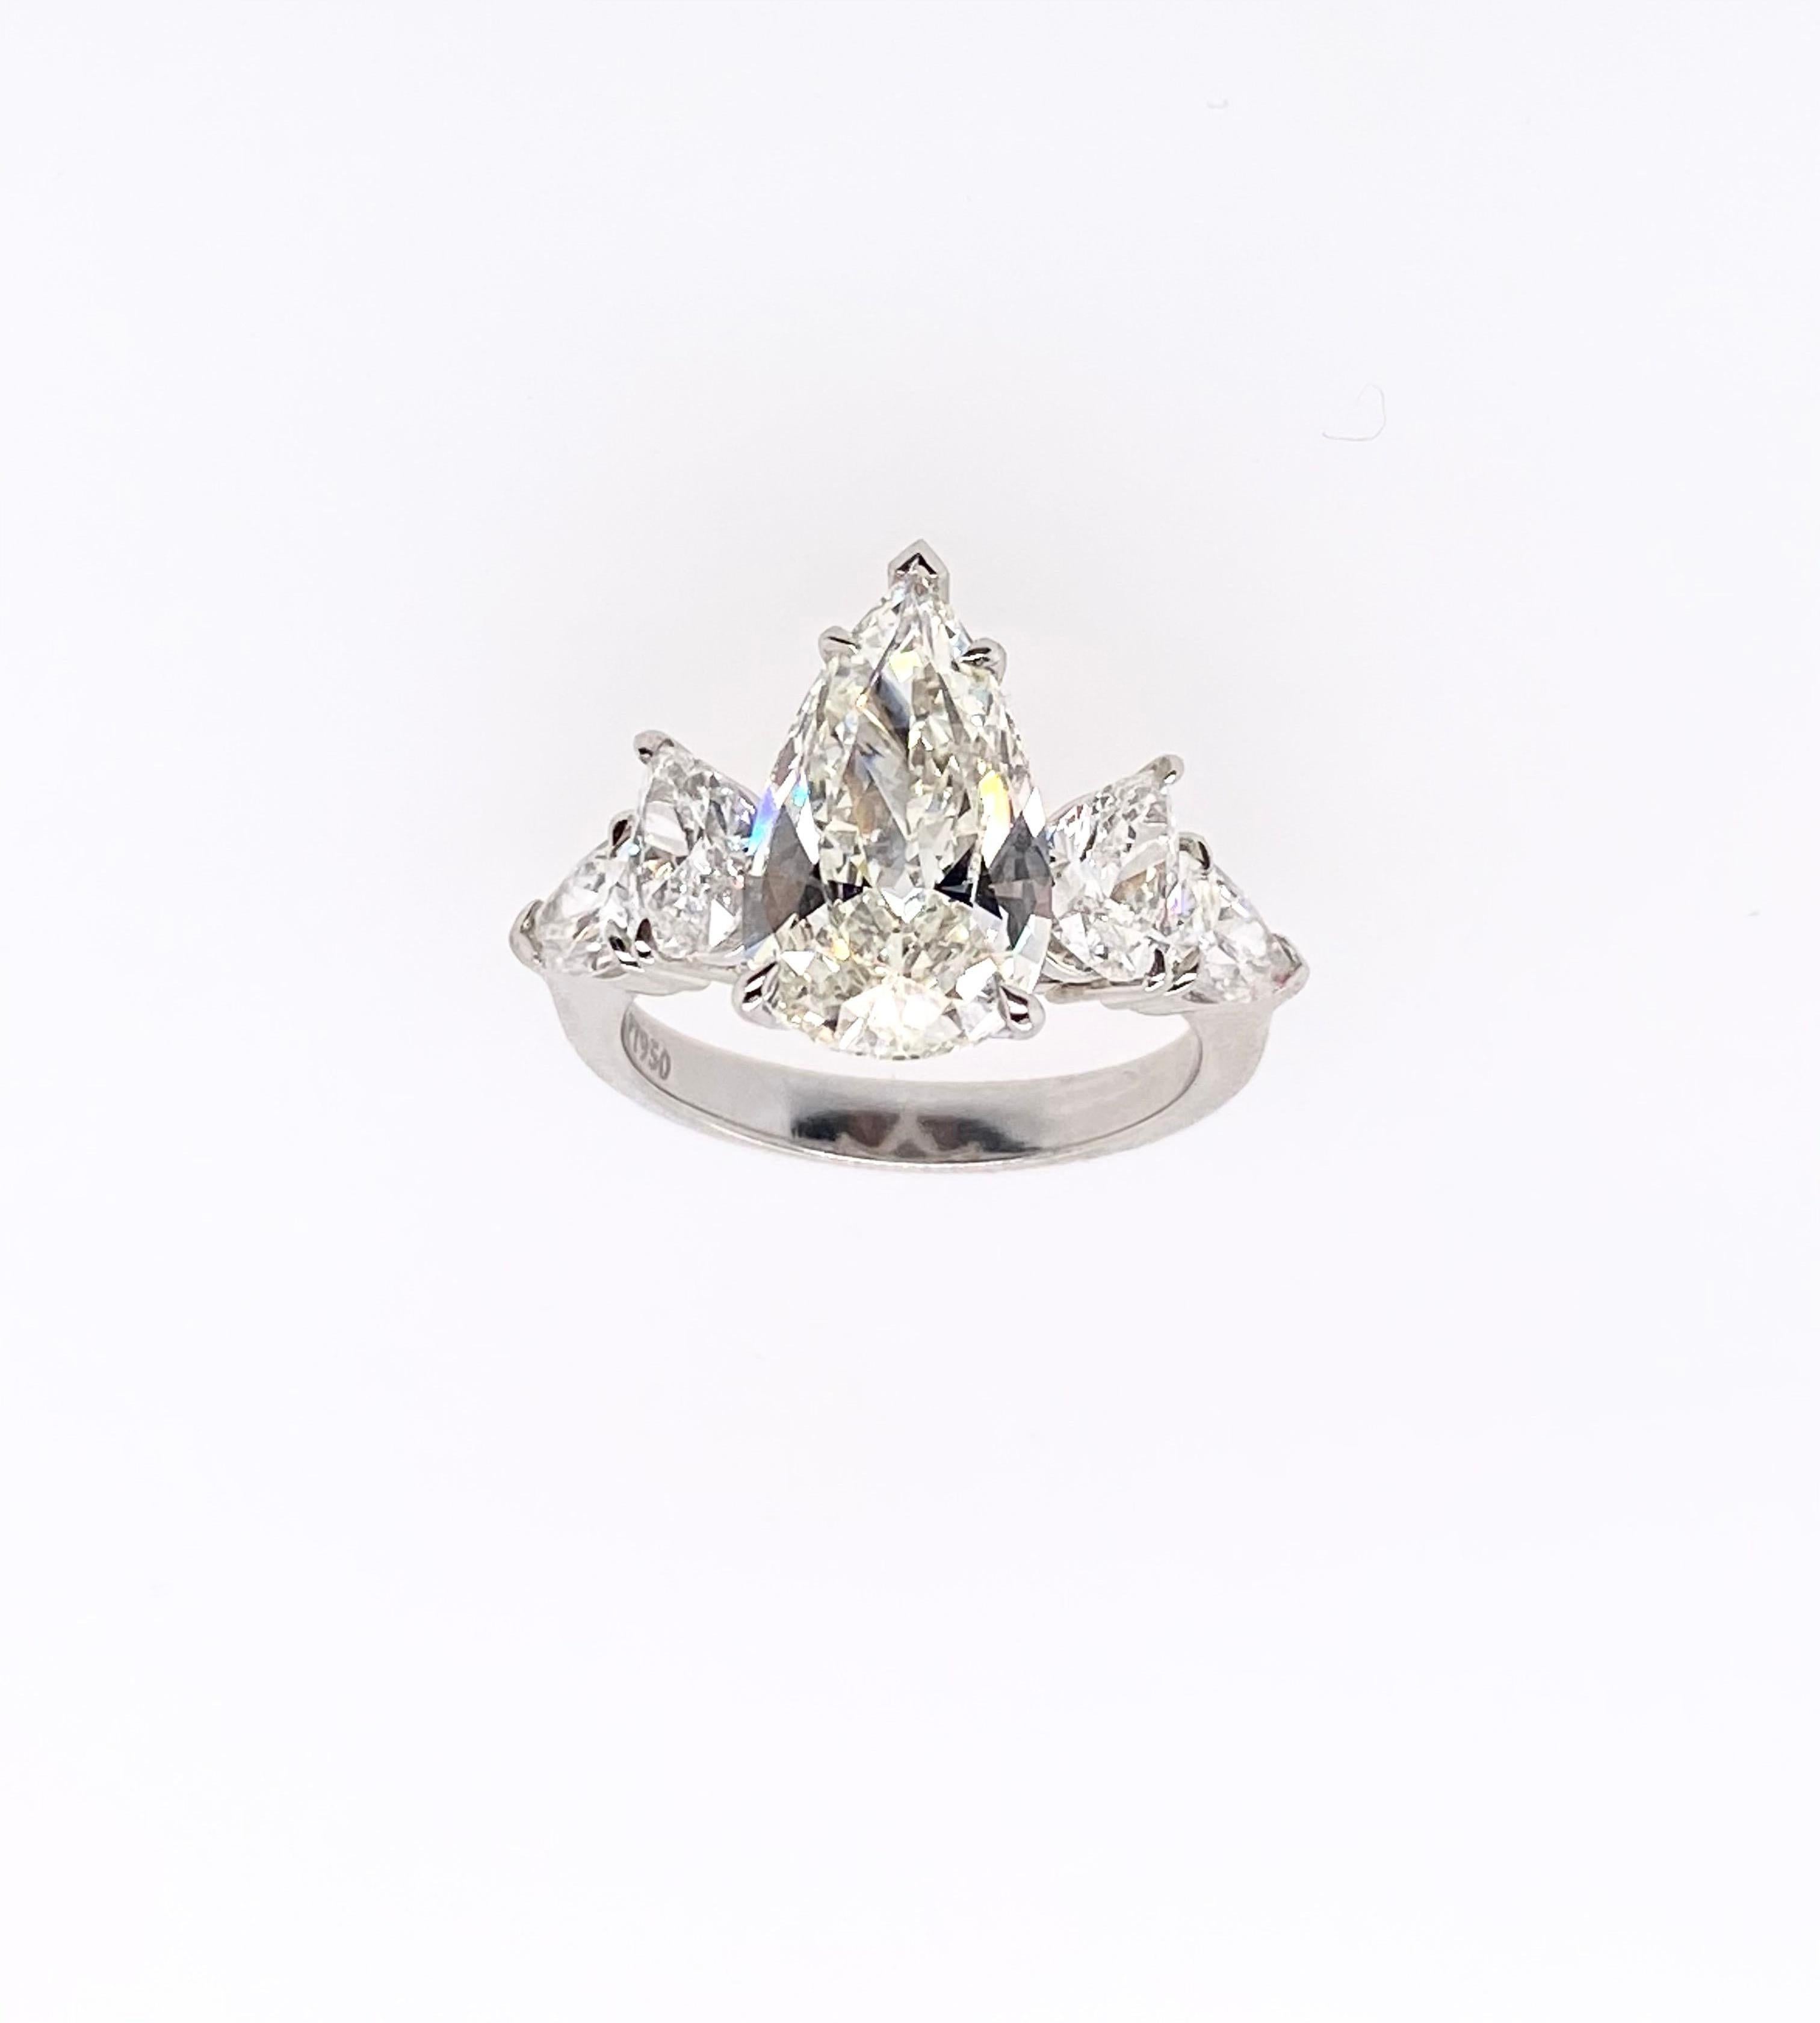 GIA Certified 3.23 carat pear shape diamond is perfectly accentuated with another two beautifully pear shape diamonds per side (as total four pear shape diamonds for both sides) mounted respectively in platinum ring. This stylish four-stone ring